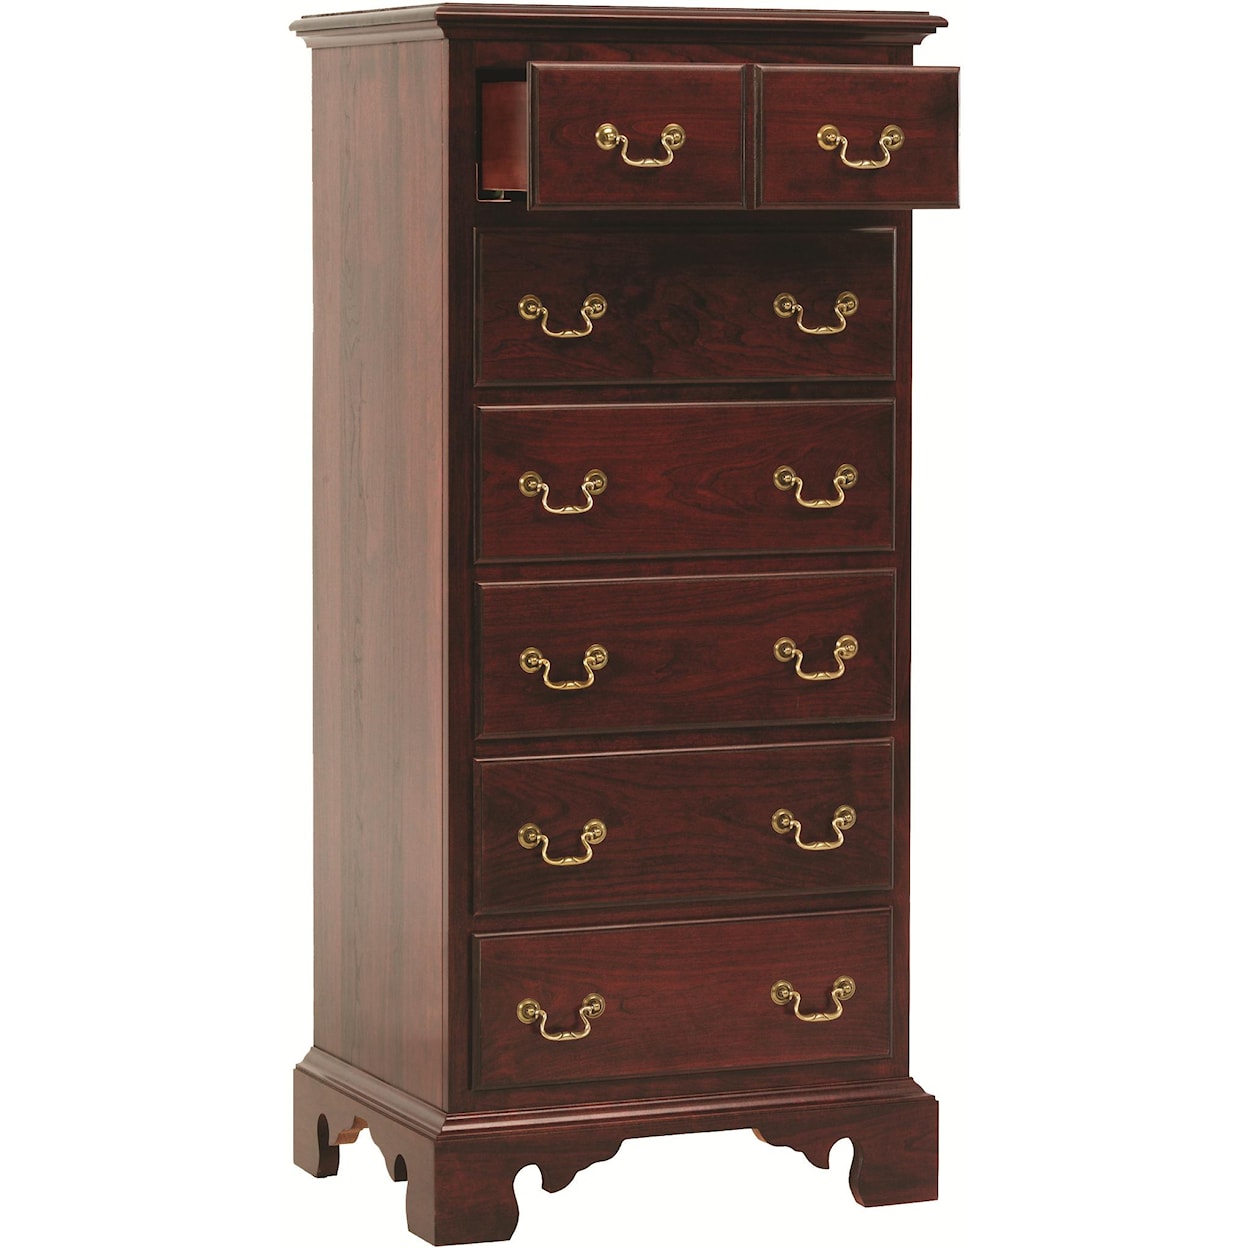 Millcraft Victoria's Tradition Lingerie Chest